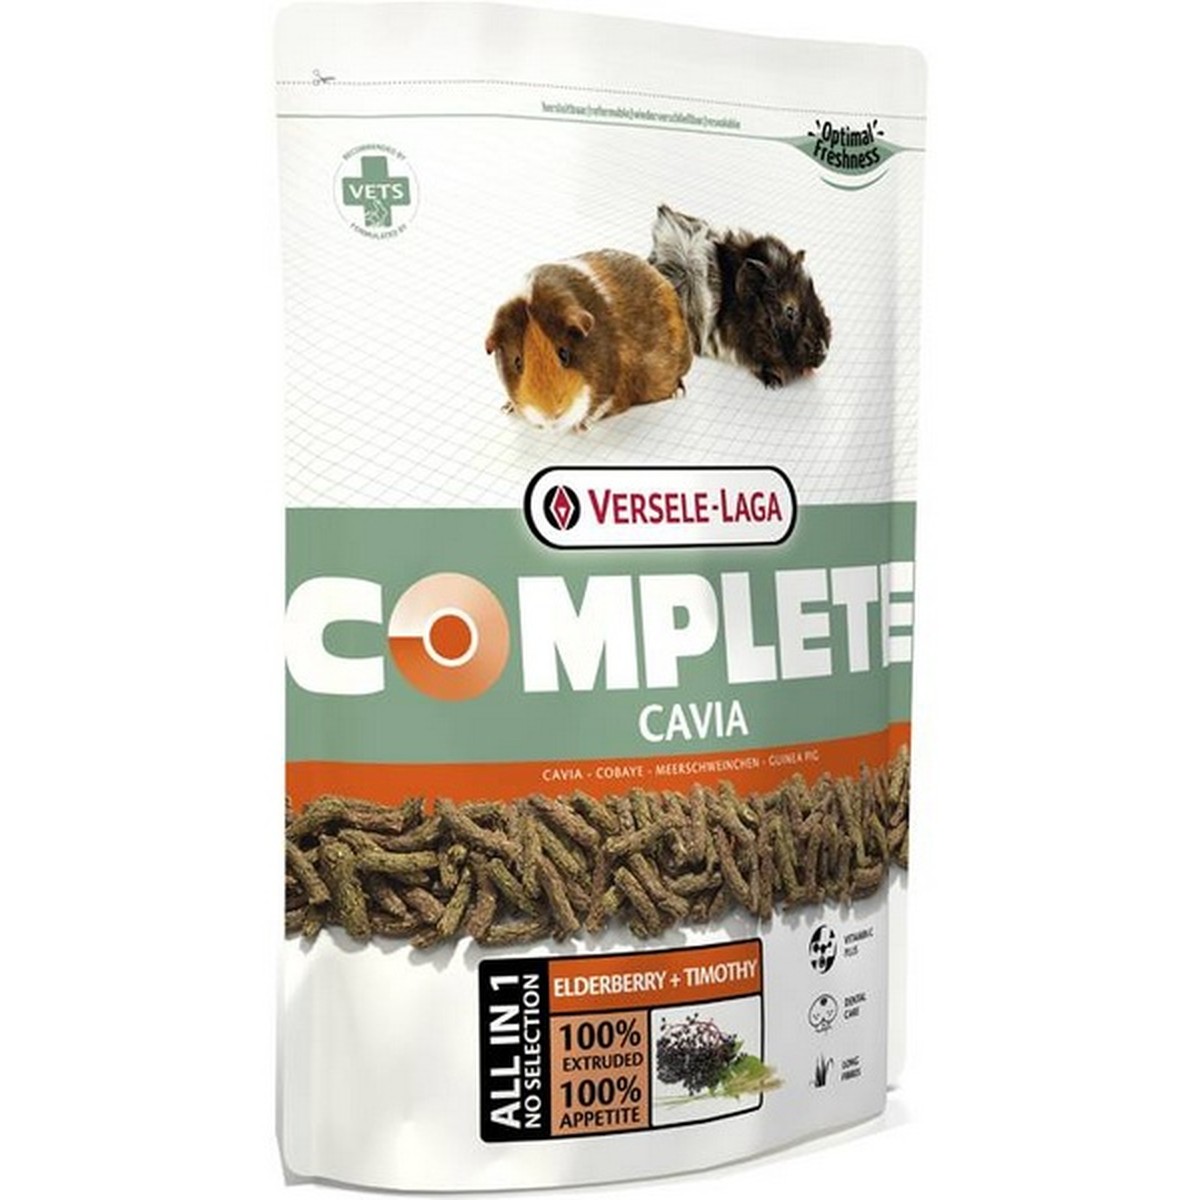   Cavia Complete pour cobayes. 500 g  500g